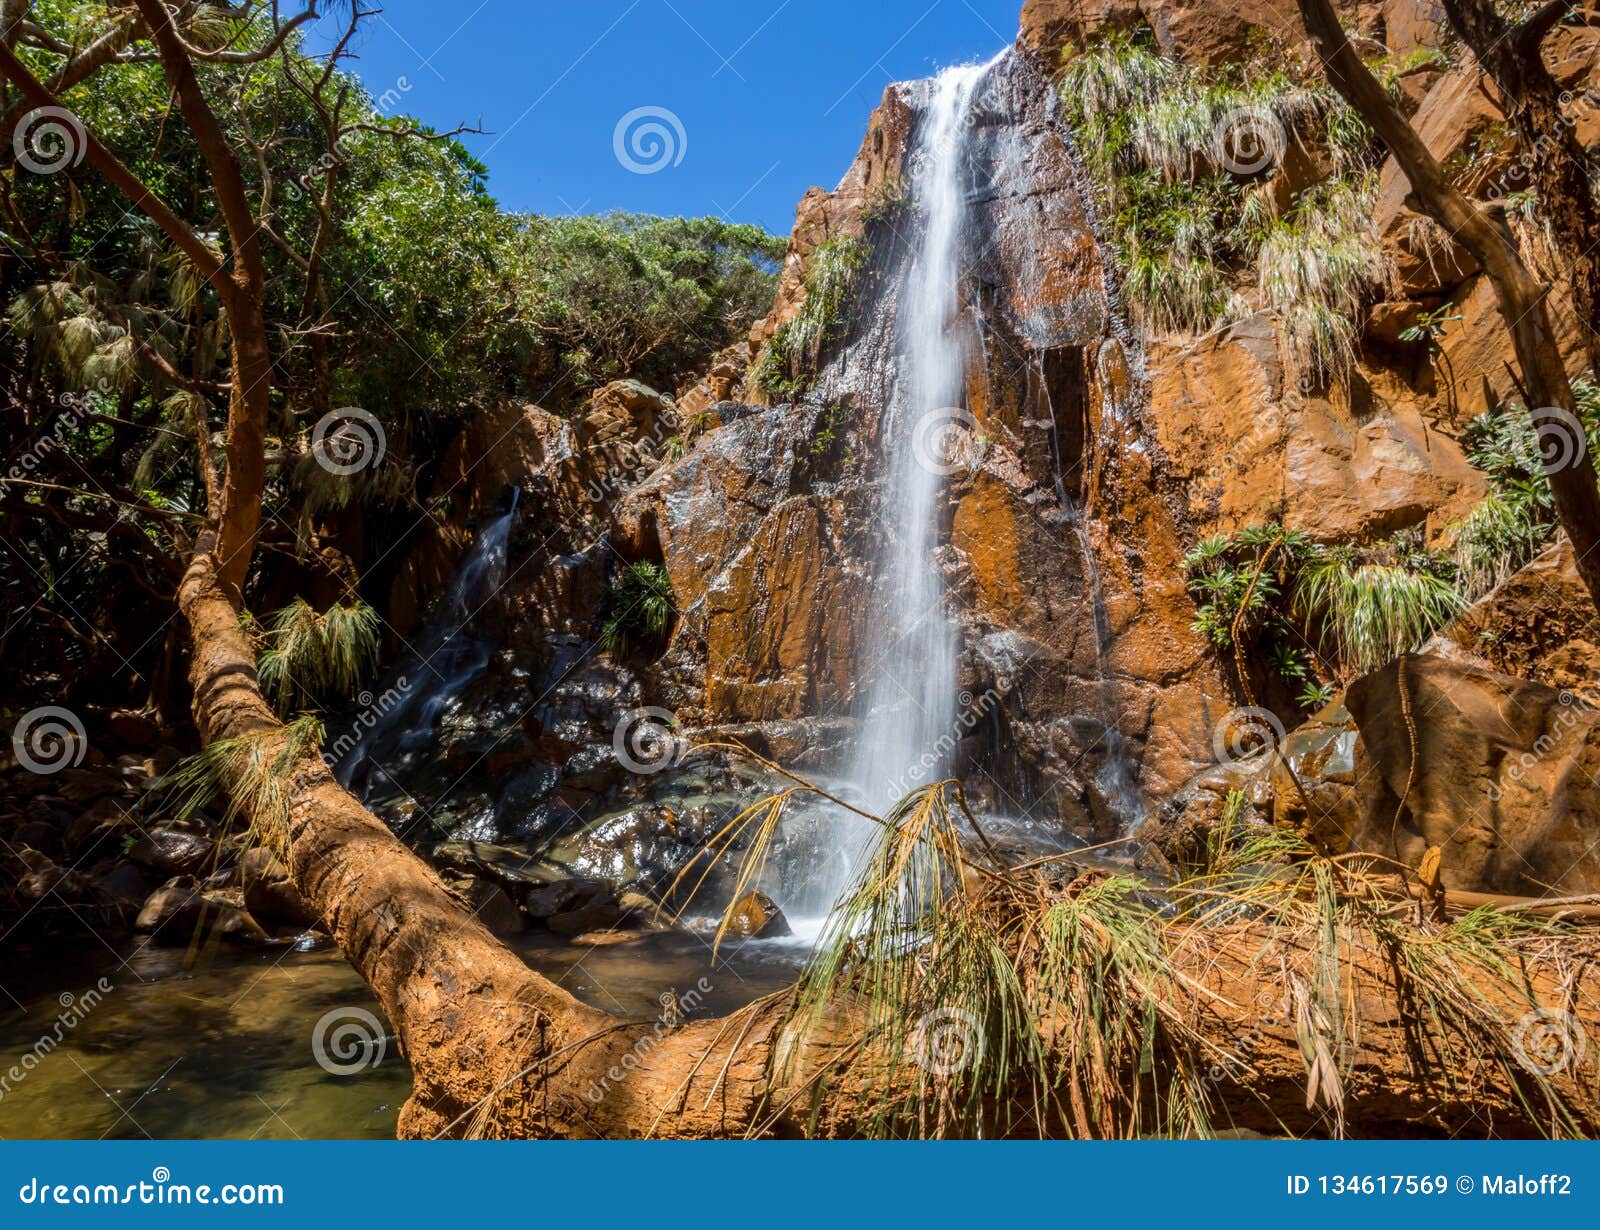 Beautiful Waterfall Falls from a Rusty Color Cliff in Evergreen Forest Behind a Pine Tree. New Caledonia, Melanesia, Oceania. Stock Image - Image of impressive, fall: 134617569